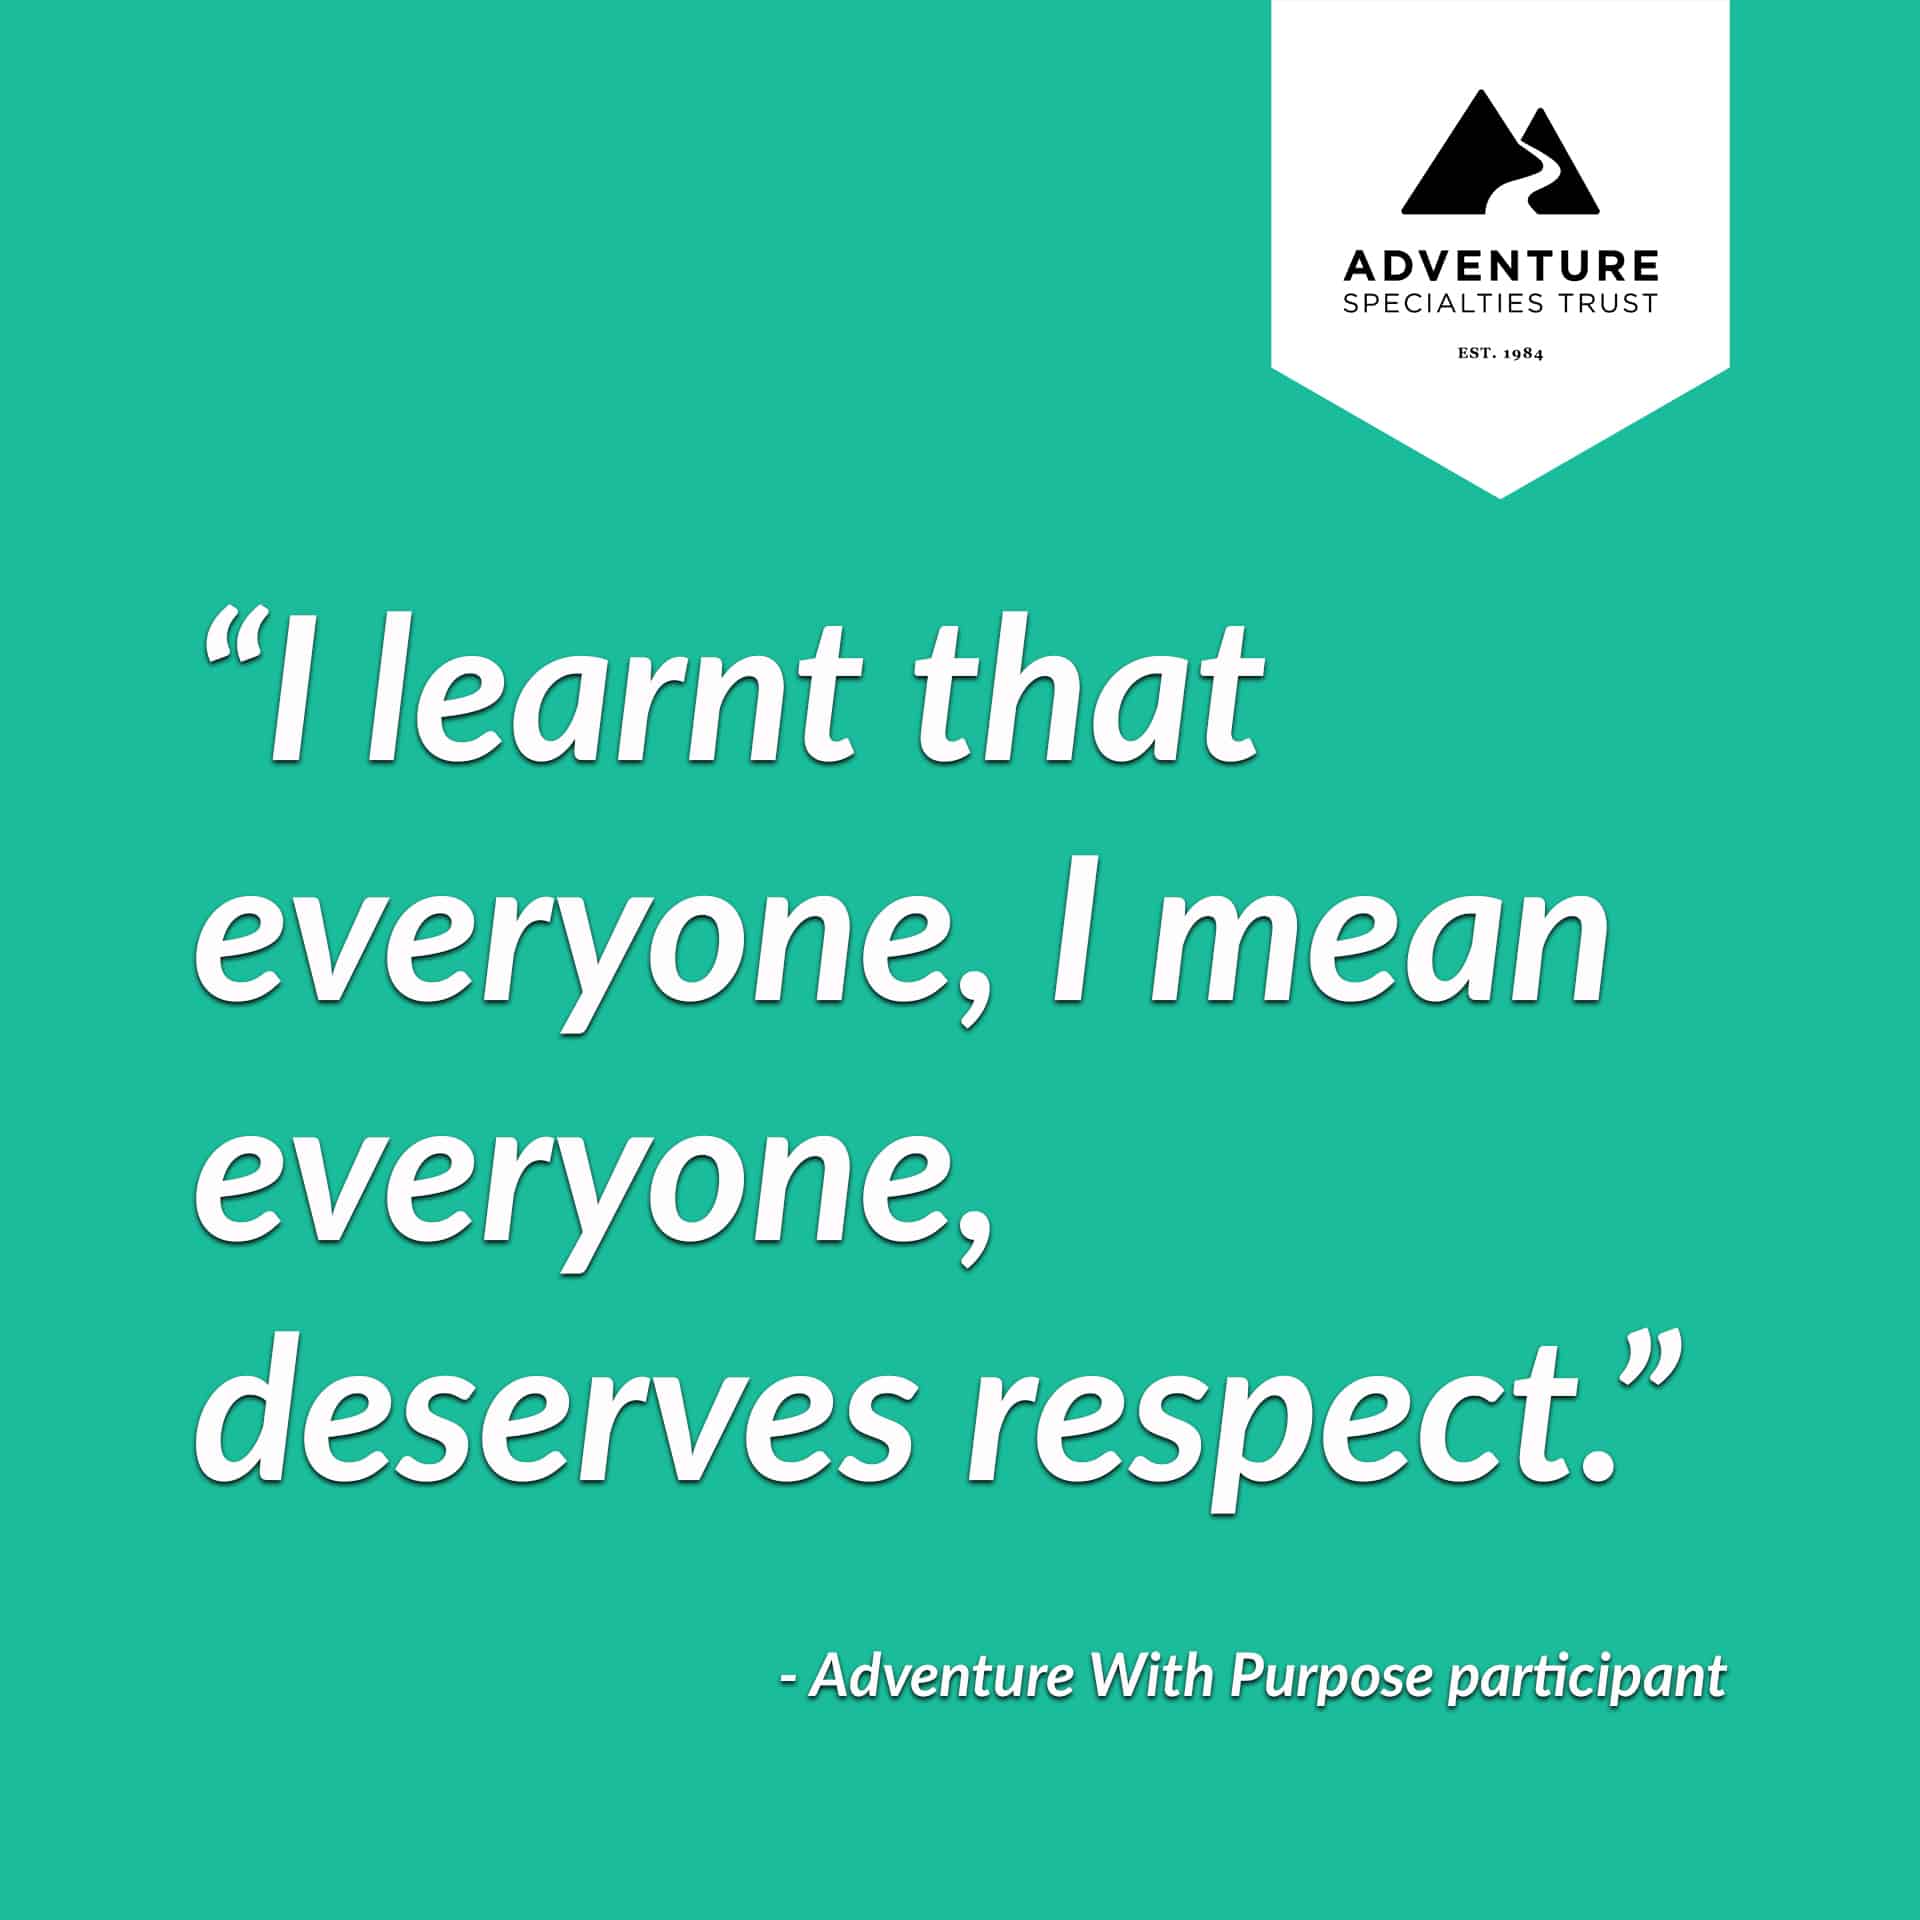 “I learnt the everyone, I mean everyone, deserves respect” and more quotes